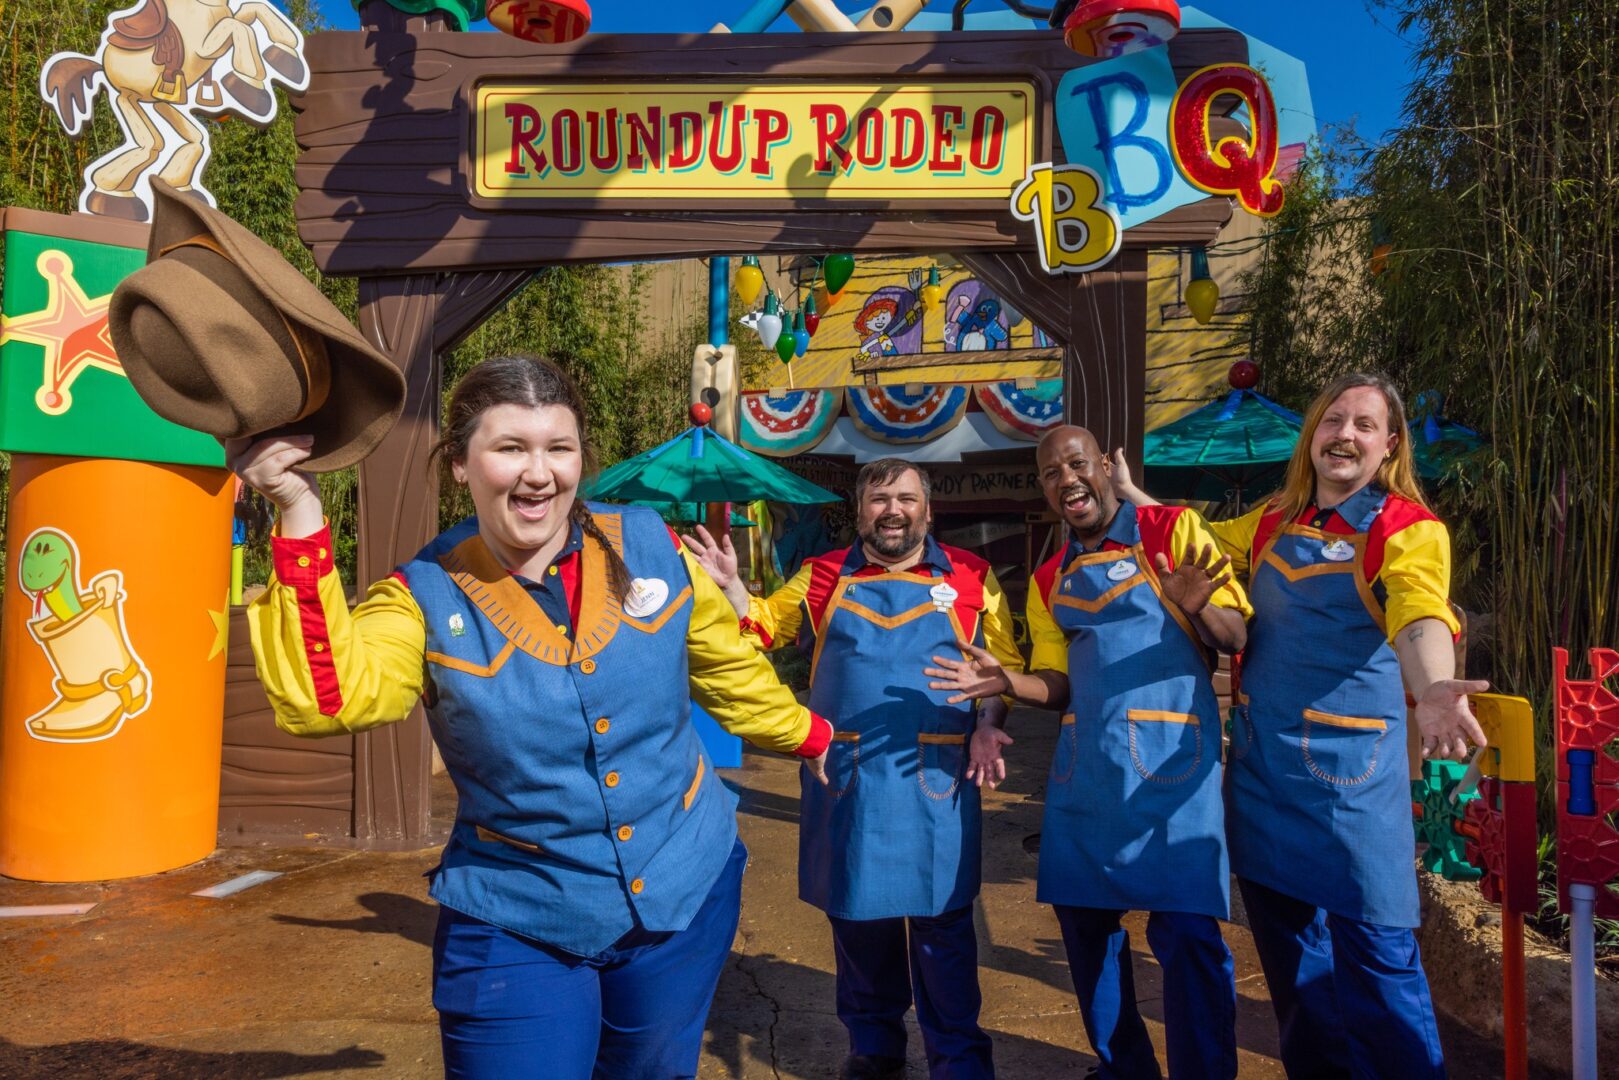 Disney Cast Members Celebrate the Opening of Roundup Rodeo BBQ